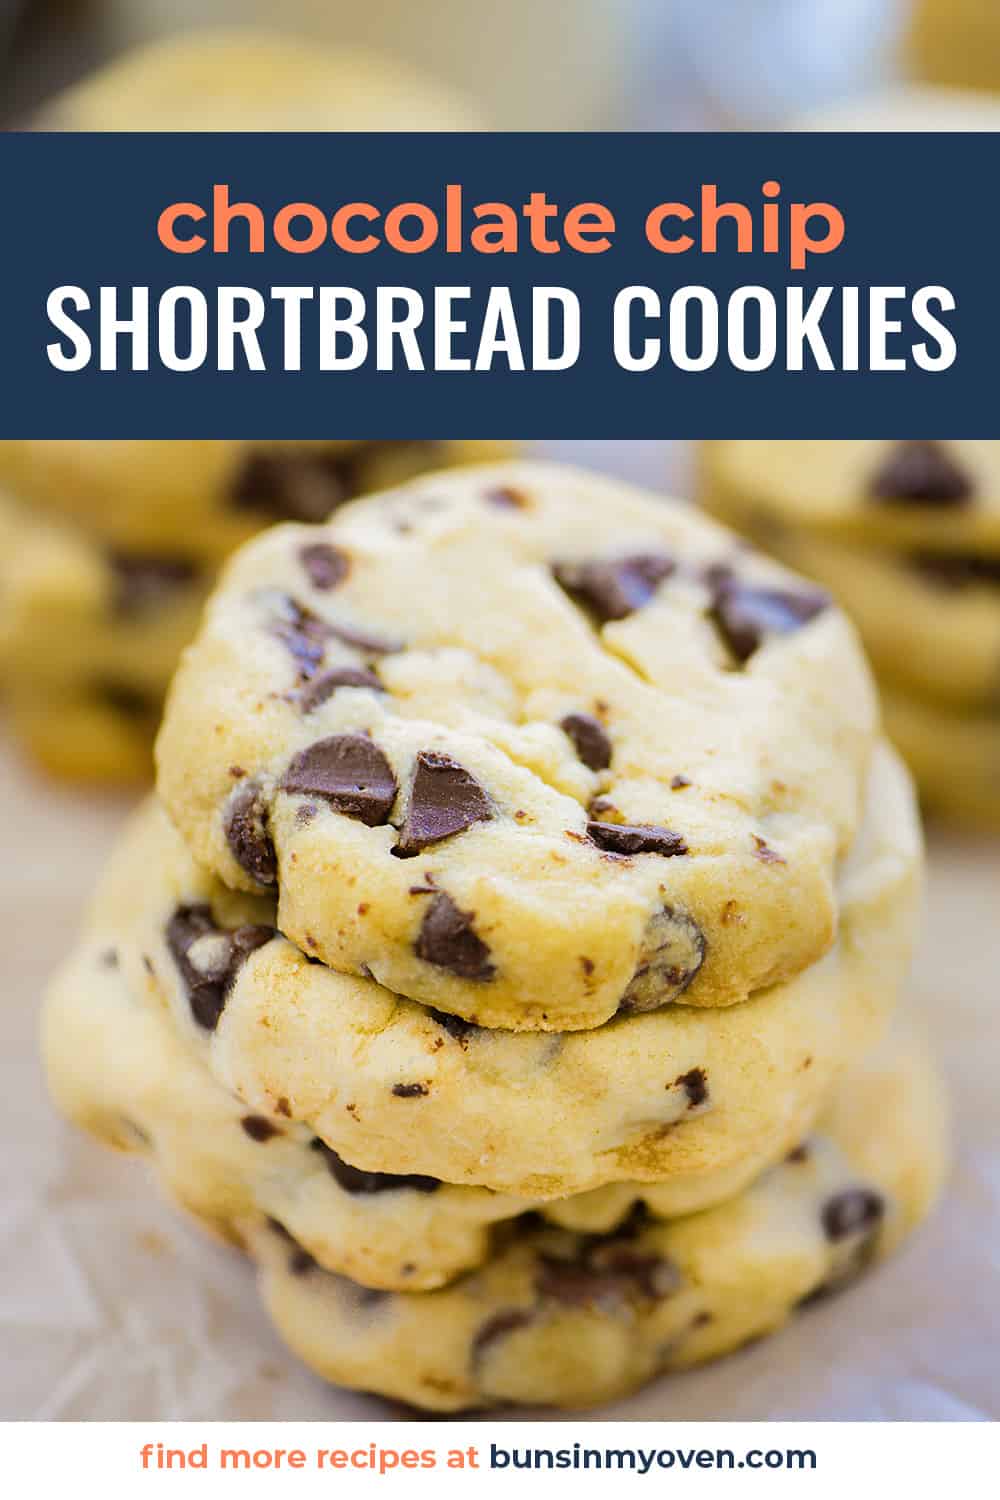 Stack of chocolate chip shortbread cookies with text for Pinterest.